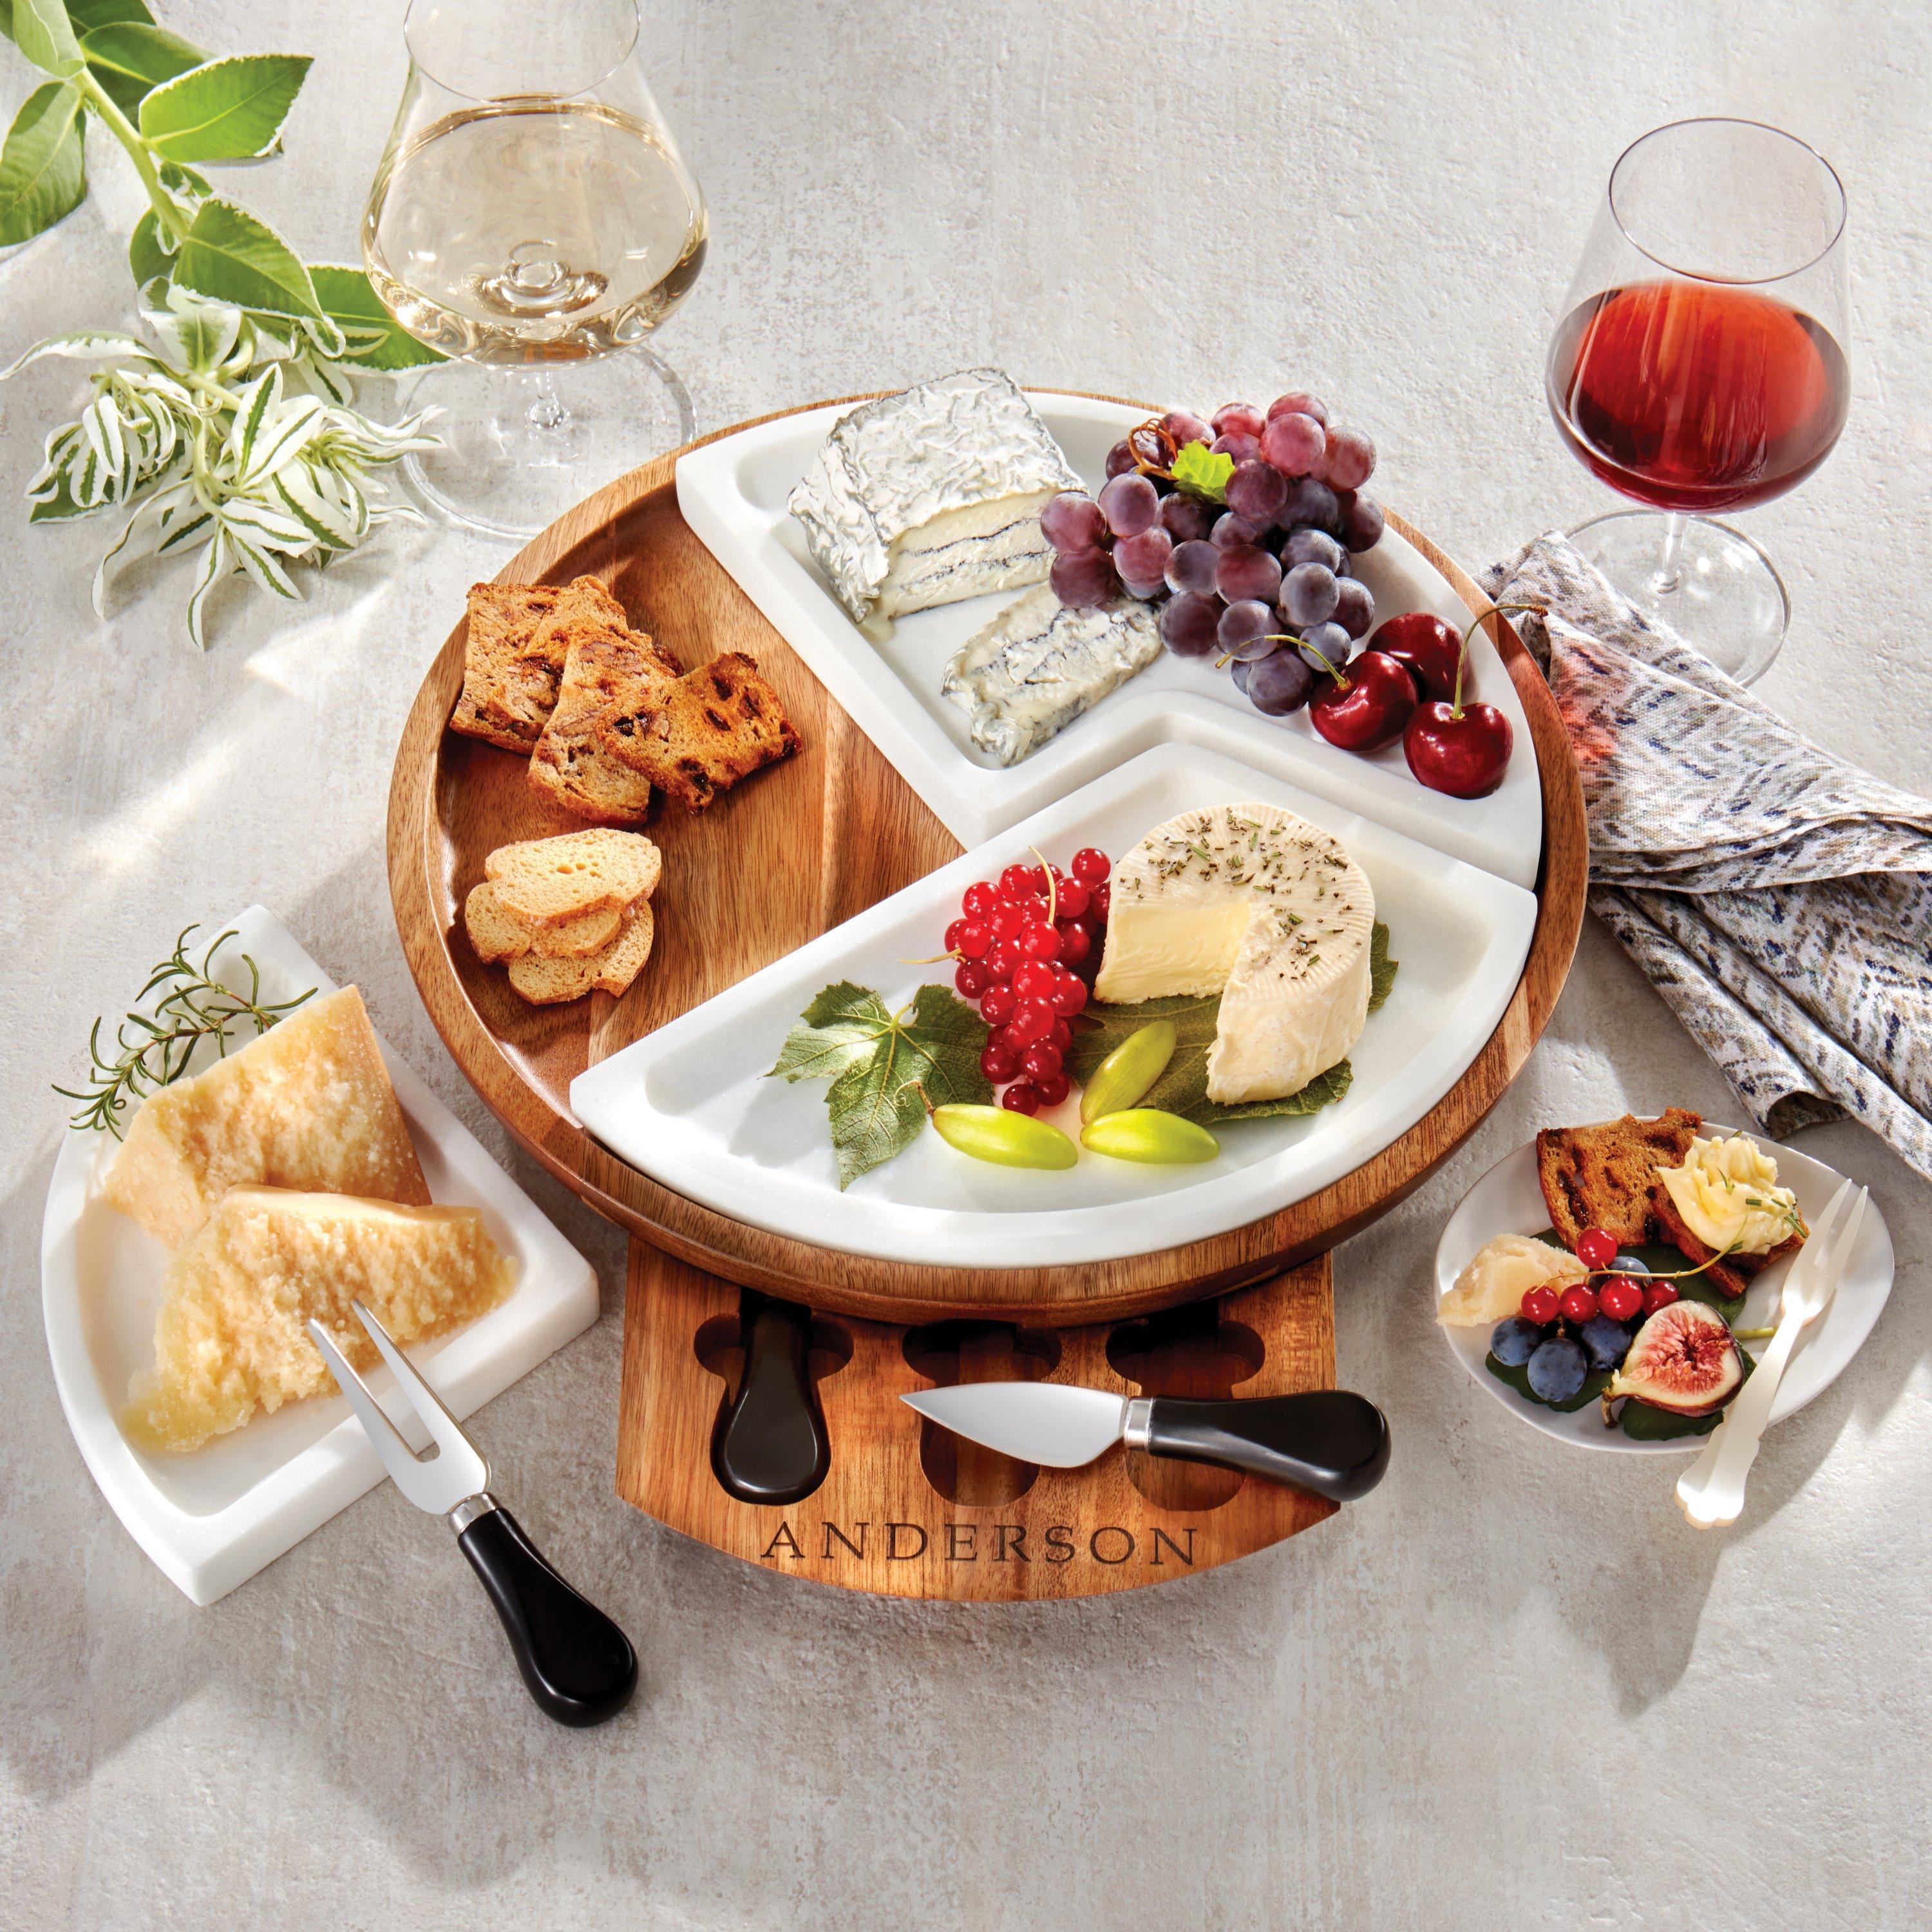 All-In-One Acacia Wood Cheese Board and Wine Decanter Serving Set